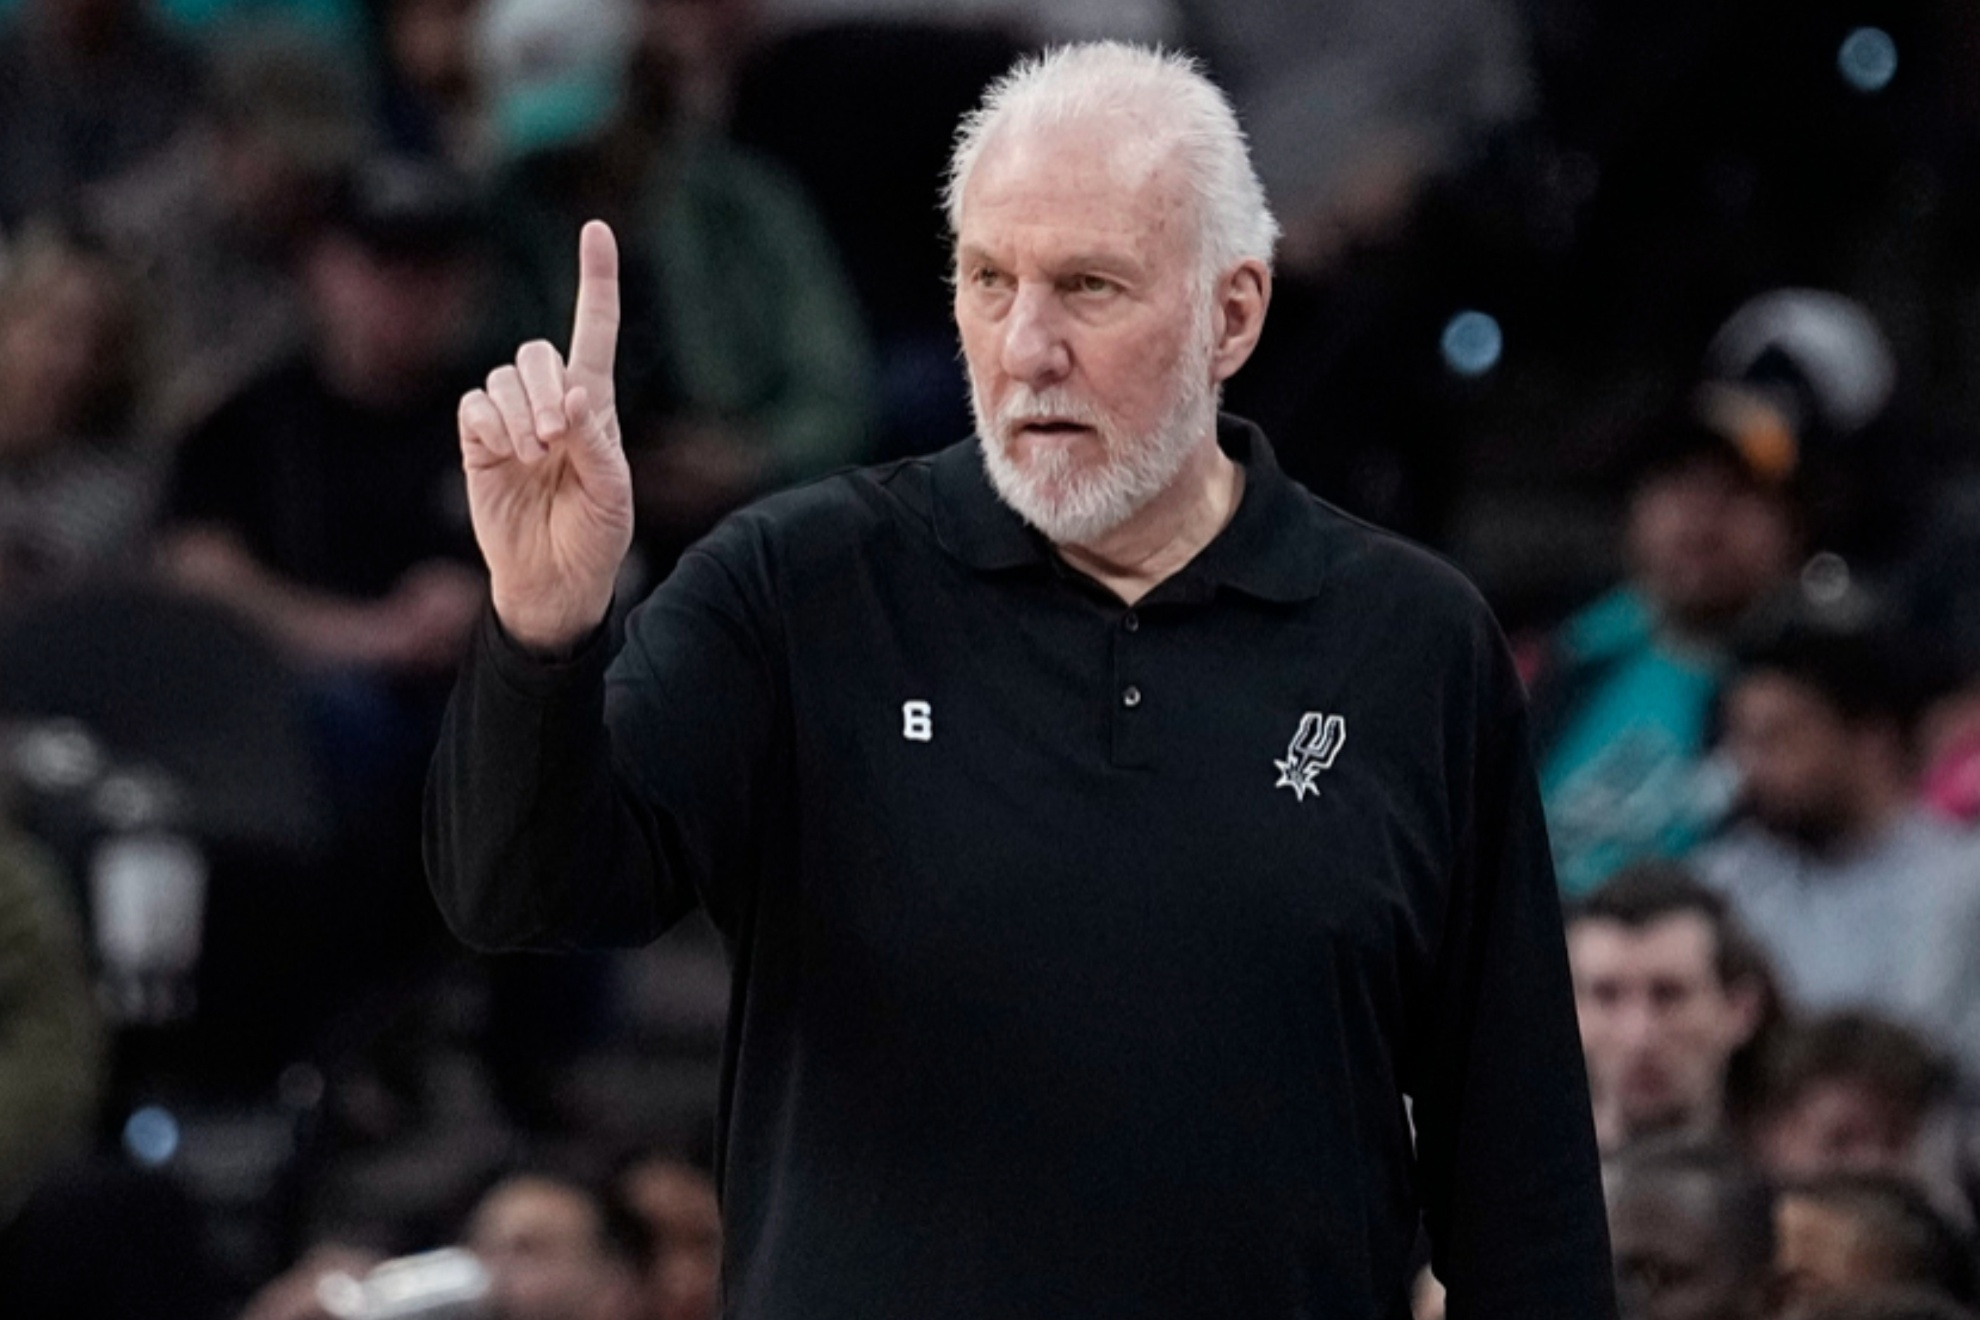 The San Antonio Spurs have extended coach Gregg Popovich's contract